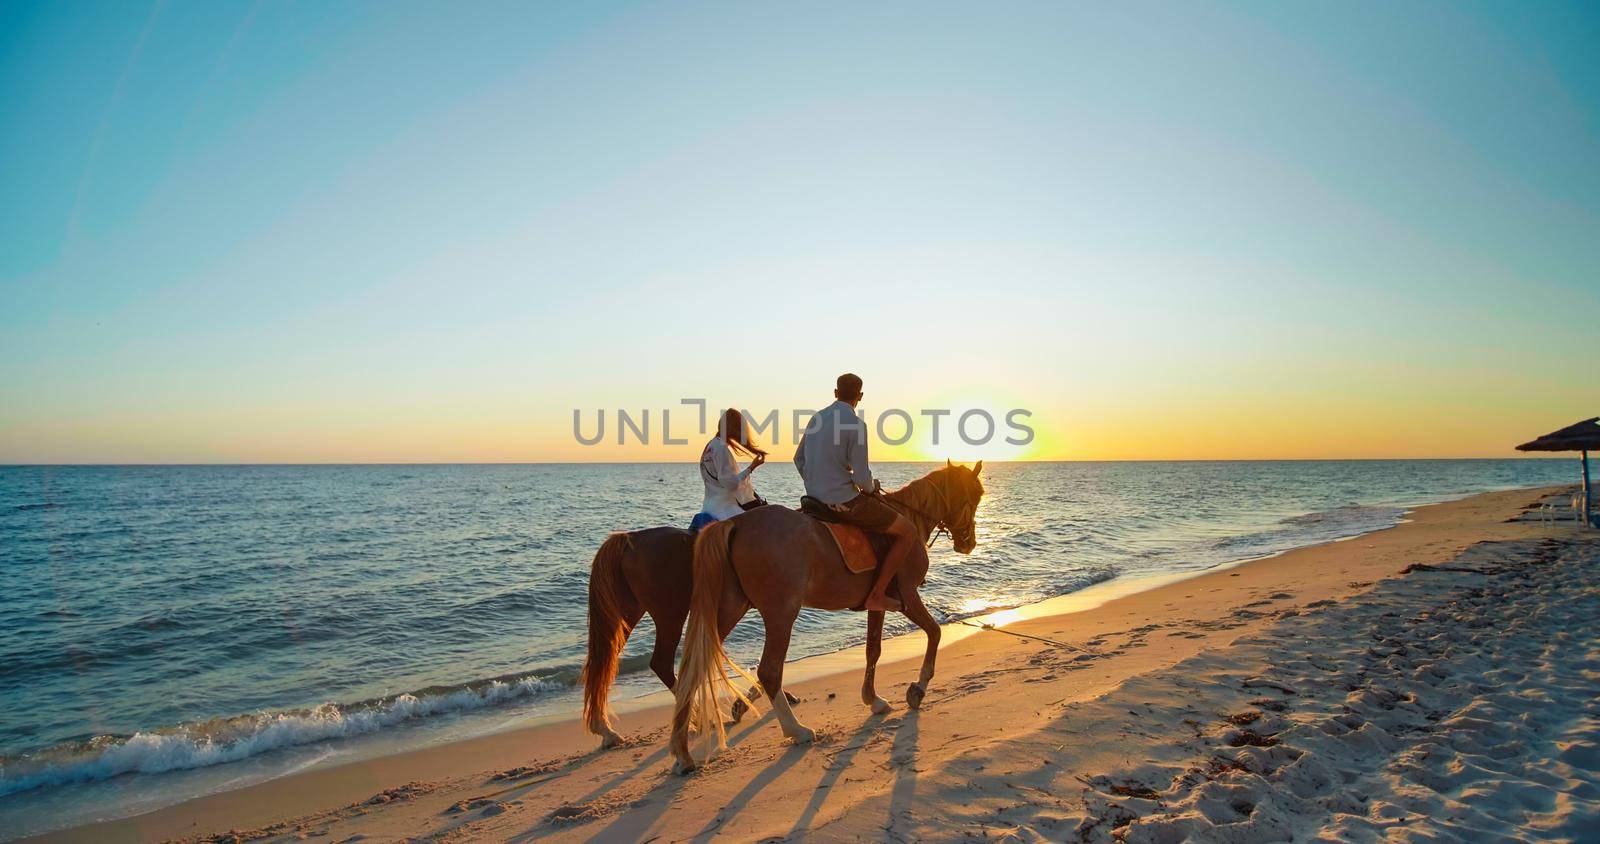 Monastir, Tunisia, 2022: Scenic, romantic view of a beach at sunset. Couple in love is enjoying holiday. Seashore with sun shining. Beautiful landscape, travel destination.